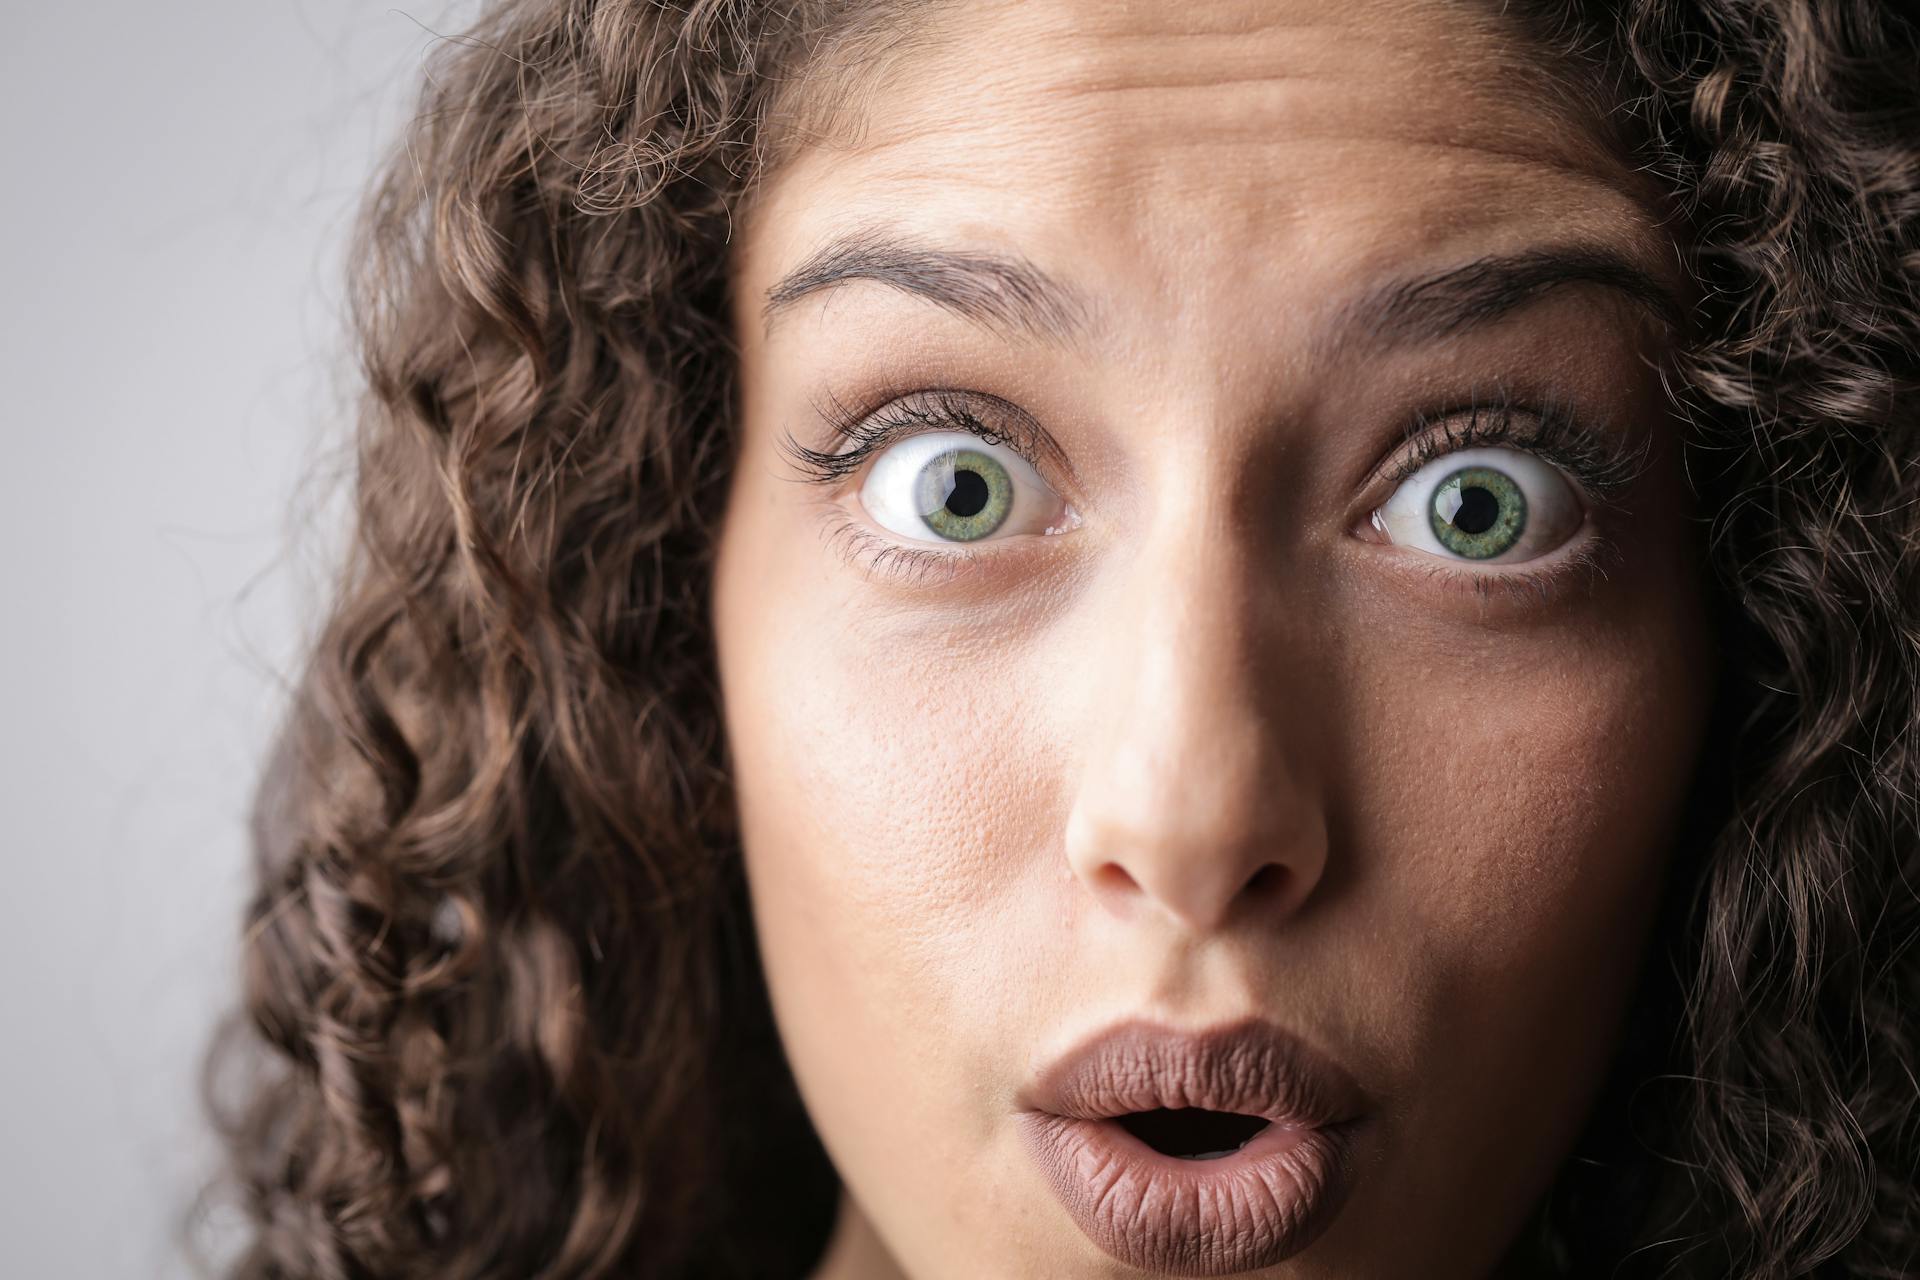 A close-up of a shocked woman | Source: Pexels